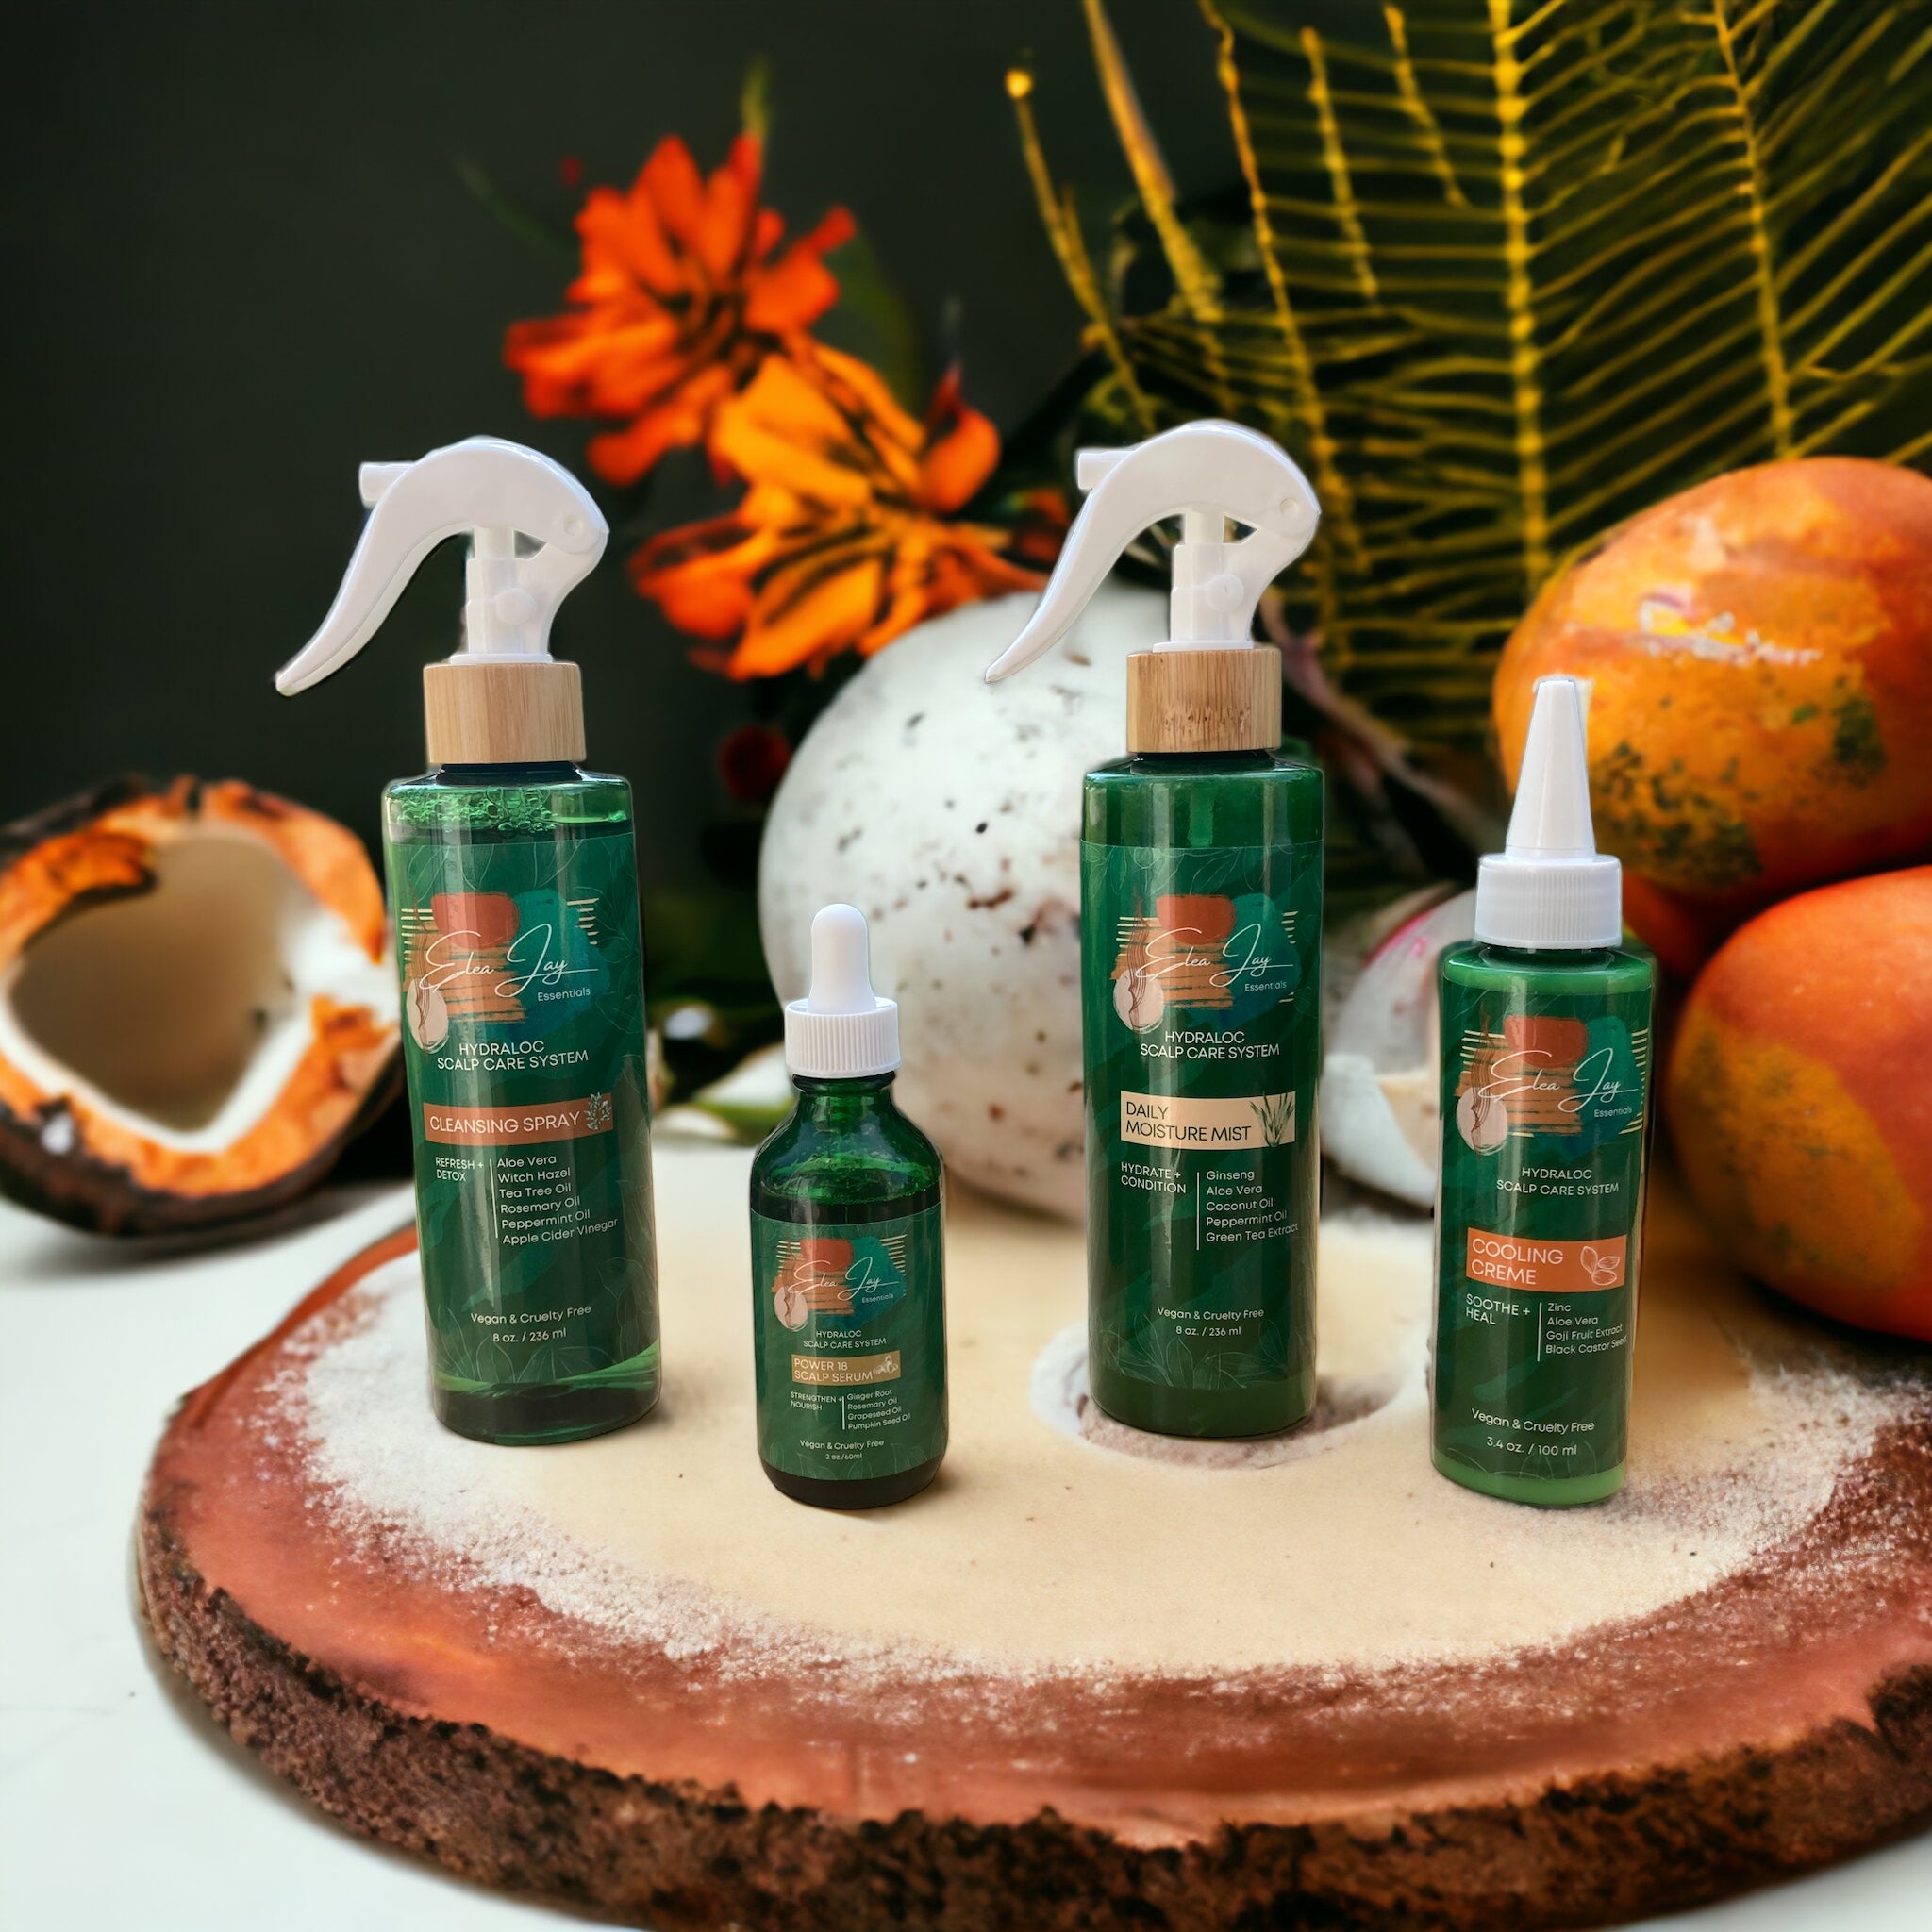 Image of The Hydraloc Scalp Care Collection on wood plank surrounded by tropical scenery